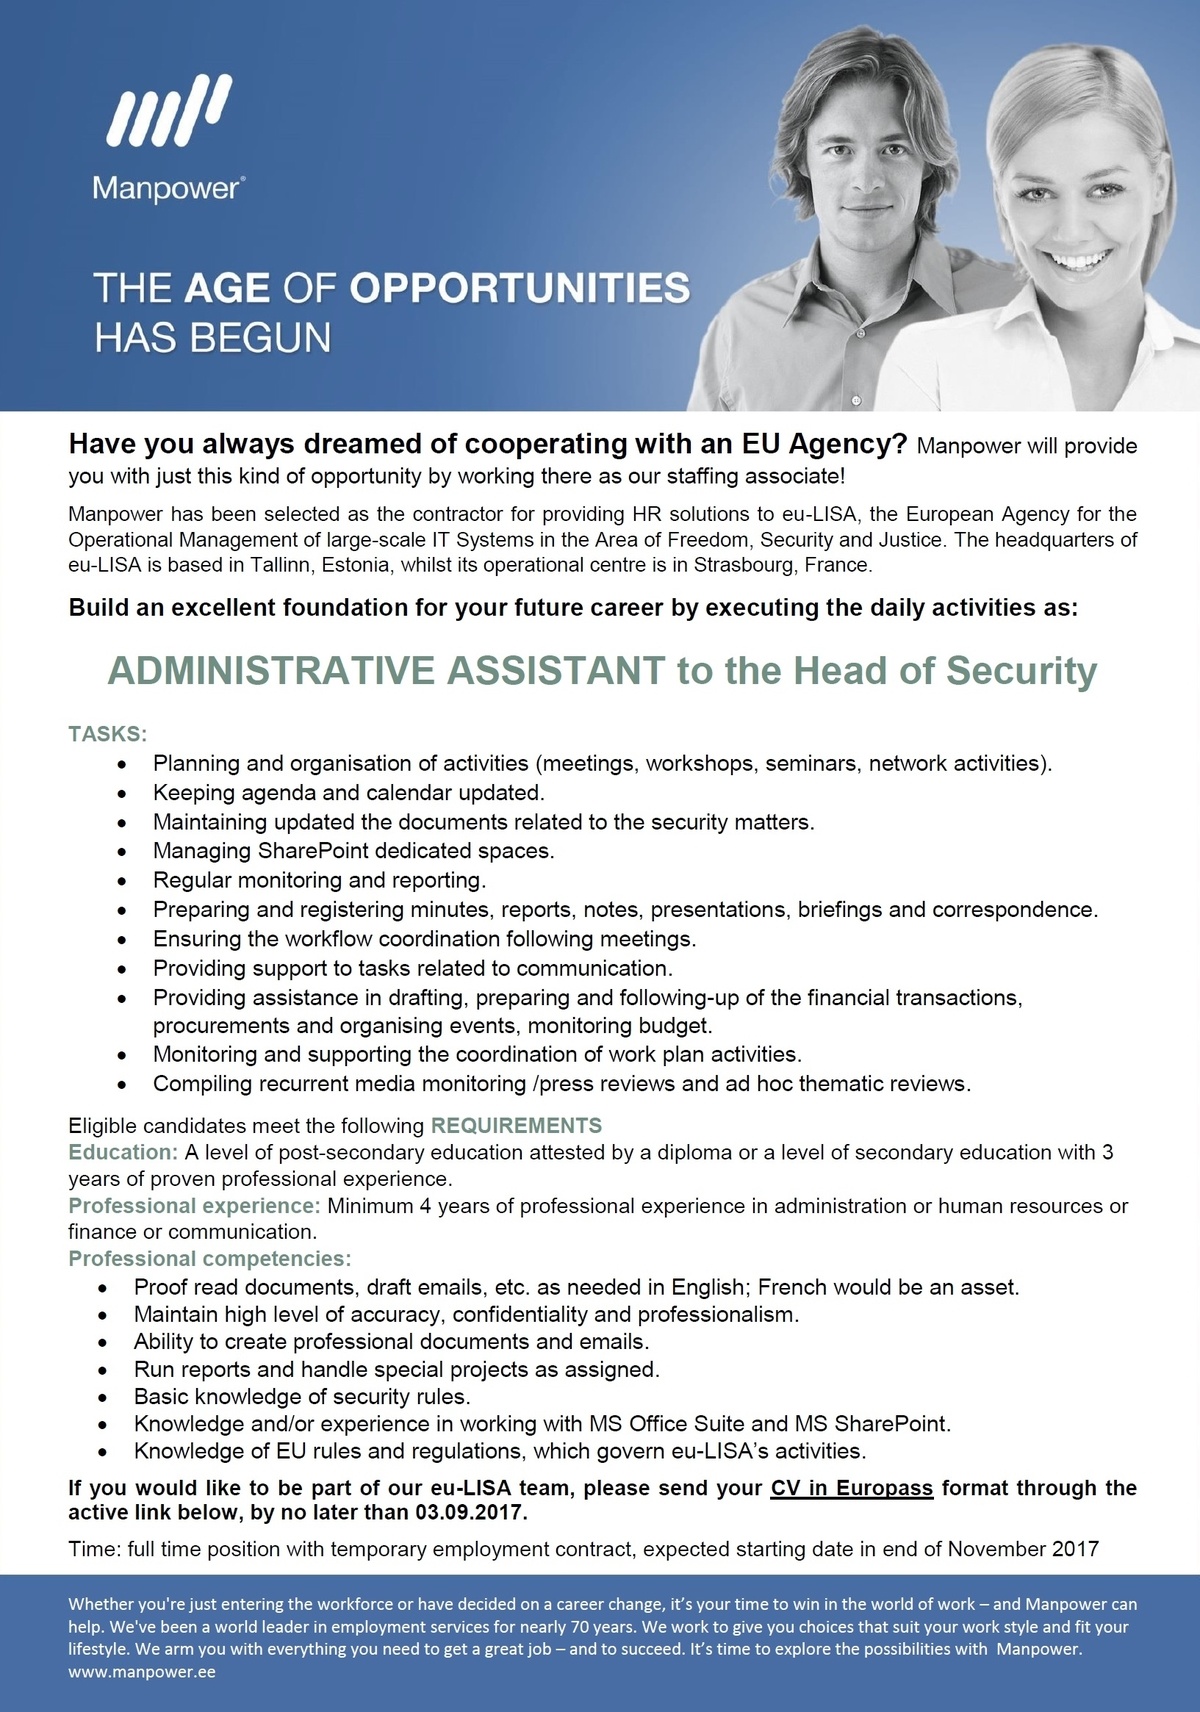 Manpower OÜ Eu-LISA: Administrative Assistant to the Head of Security